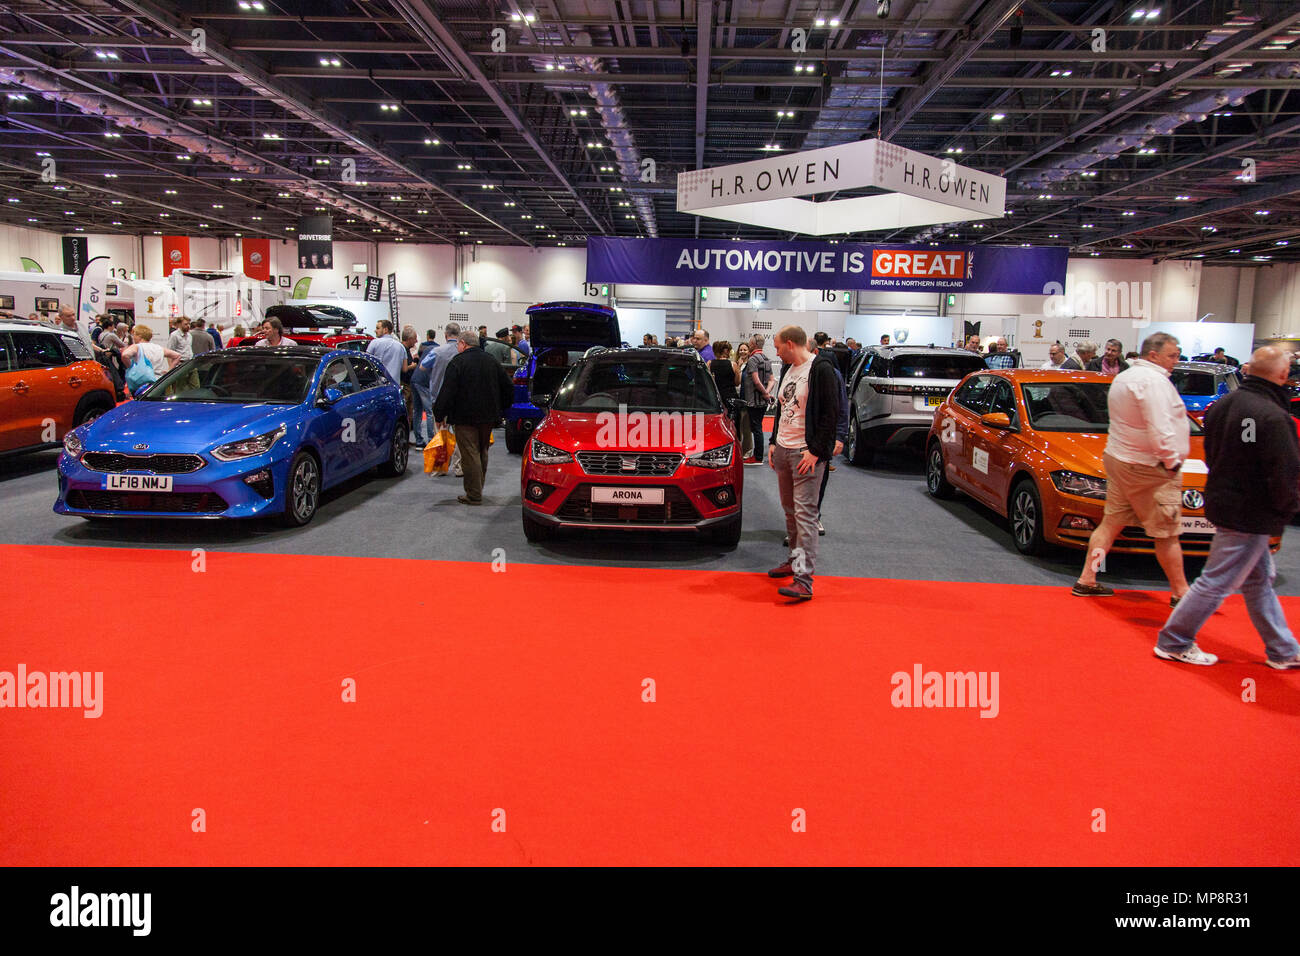 LONDON, UK - MAY 18th 2018: The confused.com London motor show at the excel convention centre. The show is the UK's largest automotive retail event Stock Photo